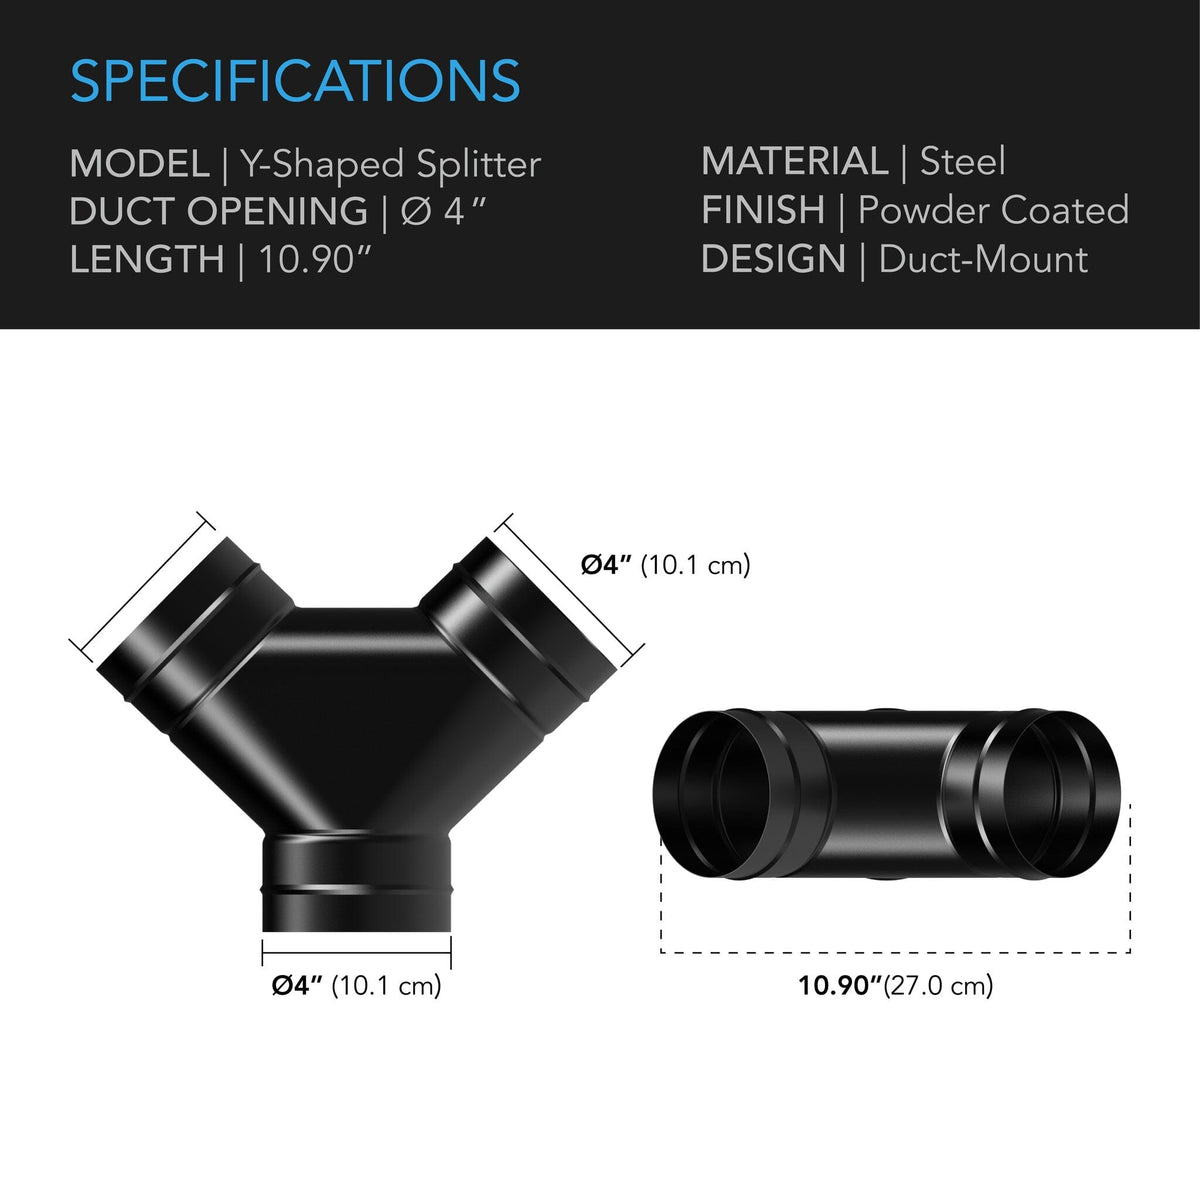 3-Way Duct Splitter 4 inch specifications